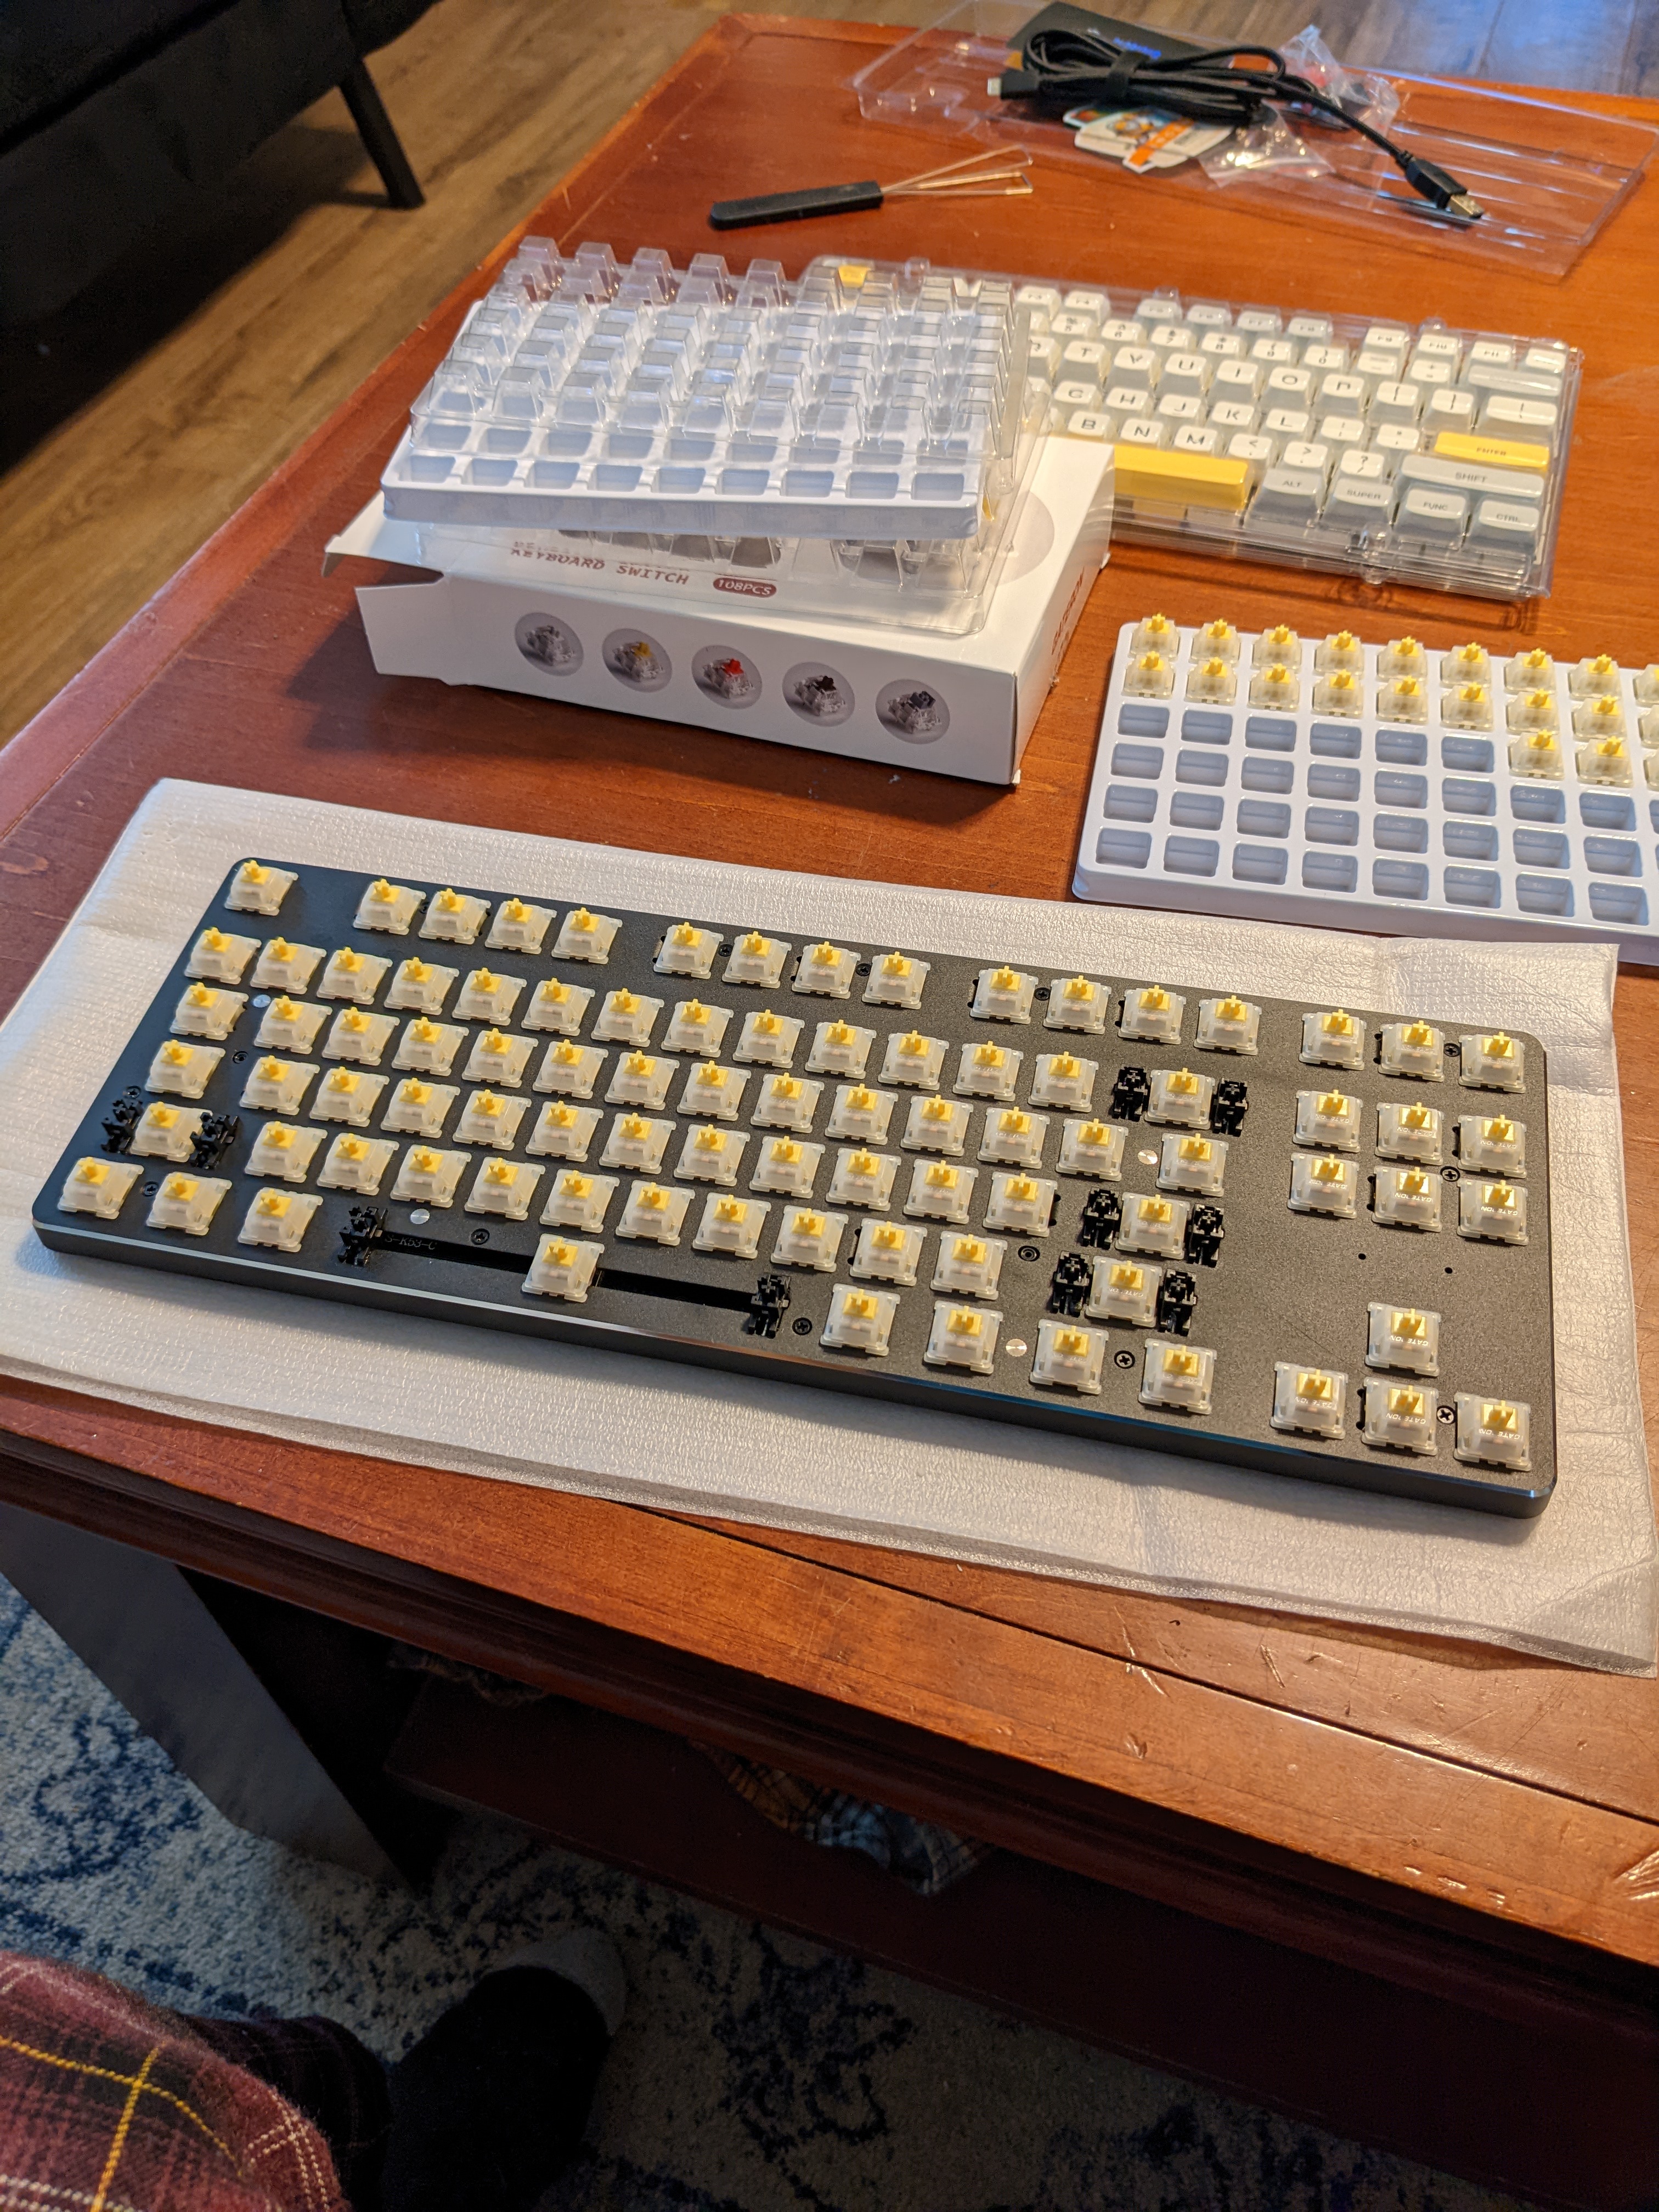 Switches are in